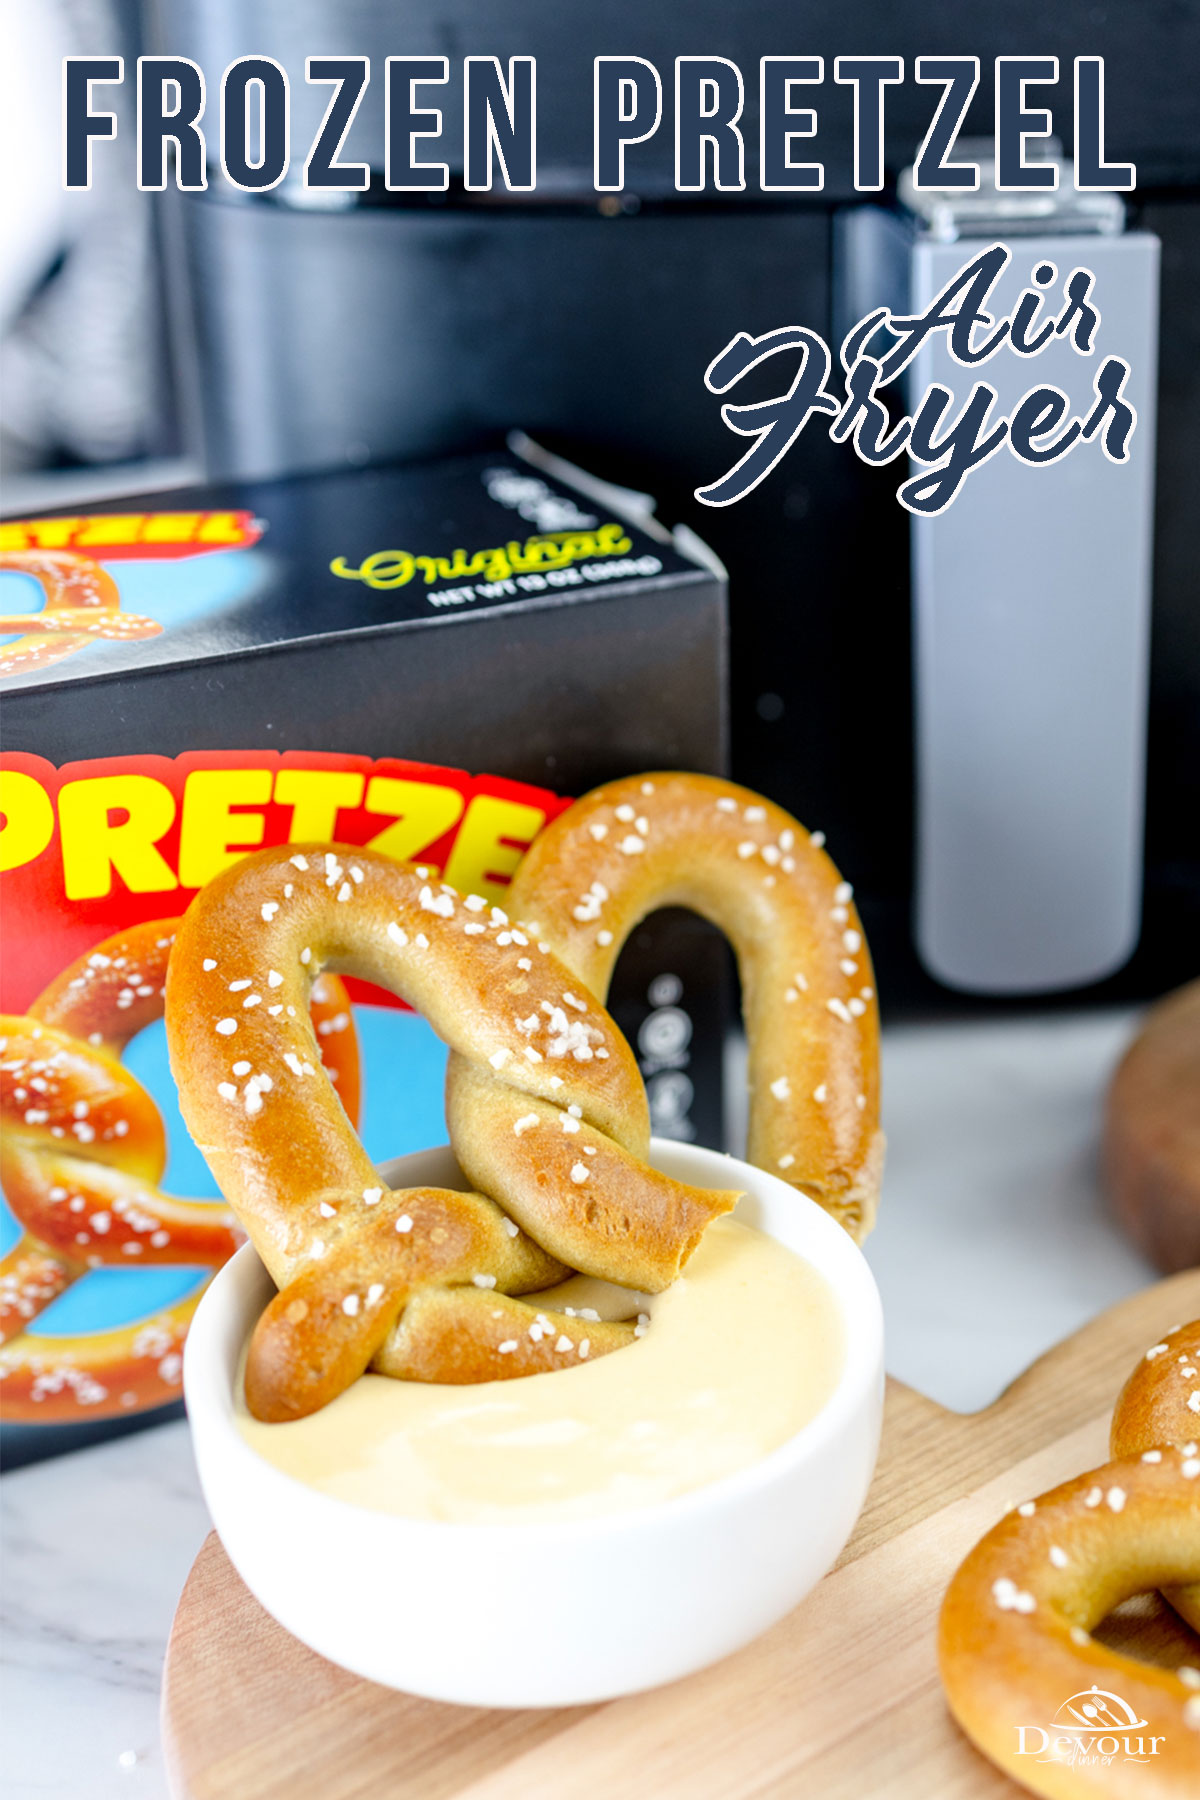 This Easy Frozen Pretzel in Air Fryer recipe is perfect for after-school snacks, game nights, or even as an enticing appetizer with your favorite dip! This air fryer recipe is the quickest and easiest way to get the perfect pretzel experience!